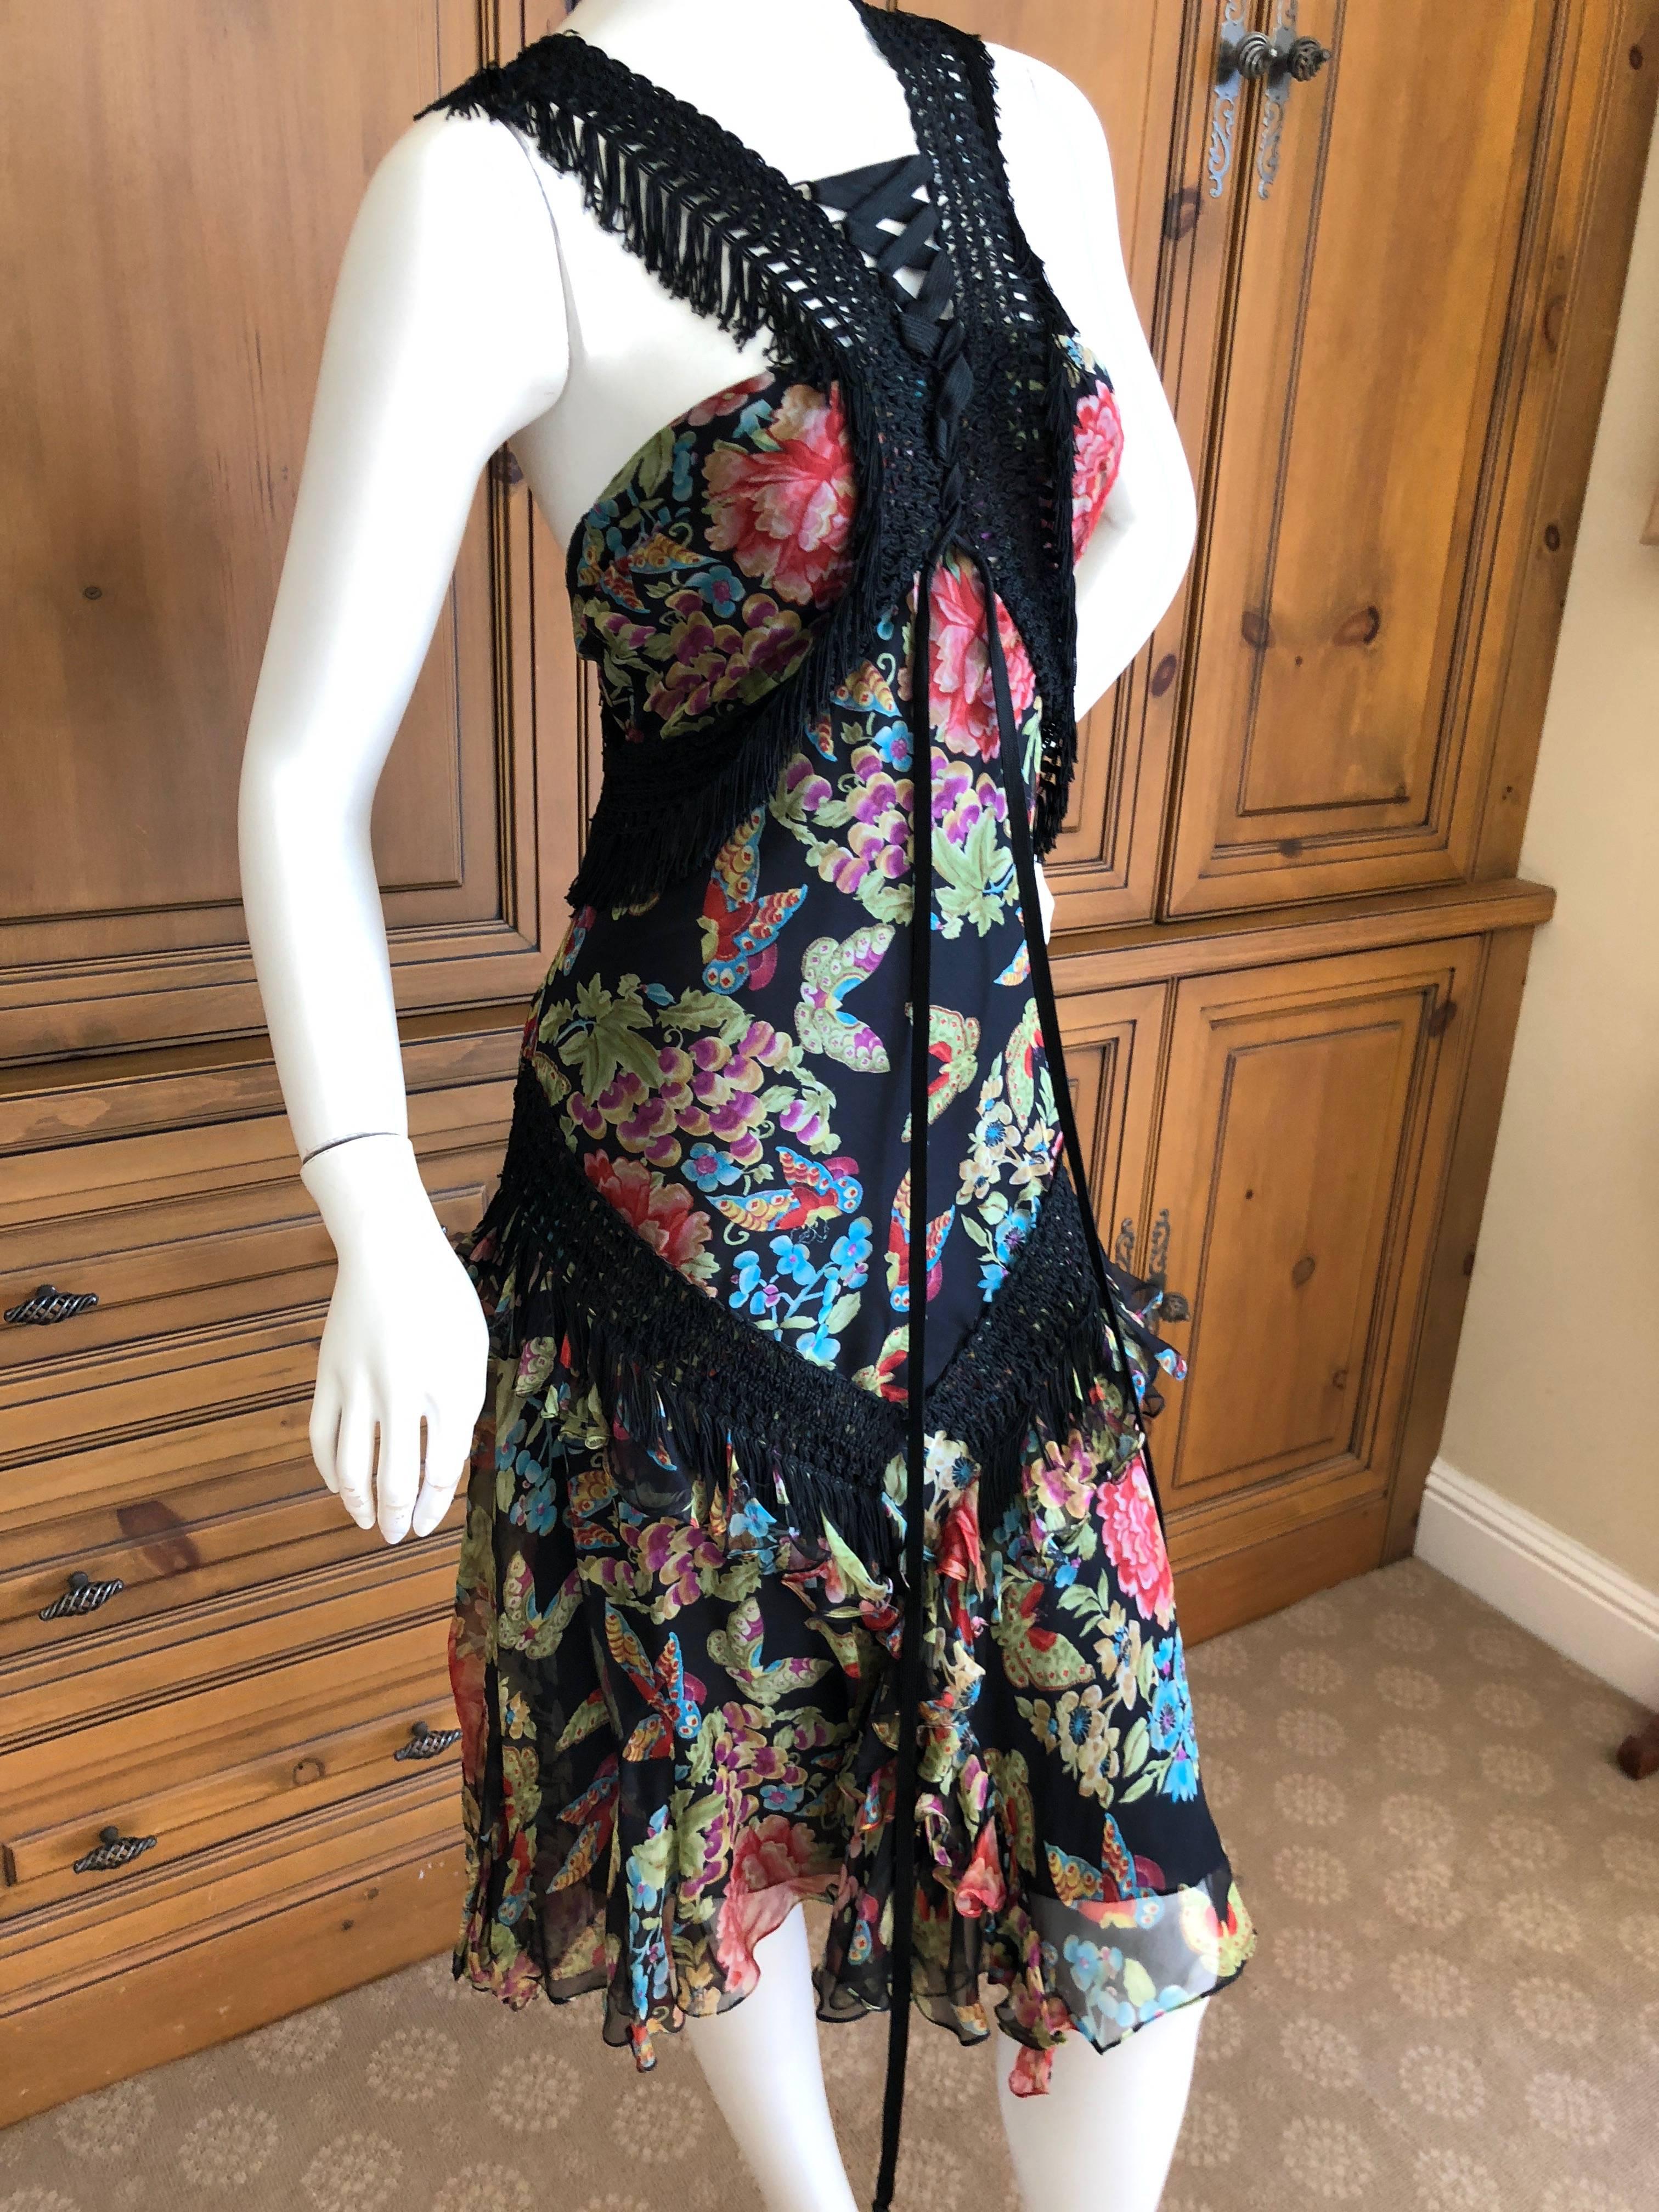 John Galliano AW 2003 Floral Dress w Macrame Fringe Corset Lace Trim Book Piece In Excellent Condition For Sale In Cloverdale, CA